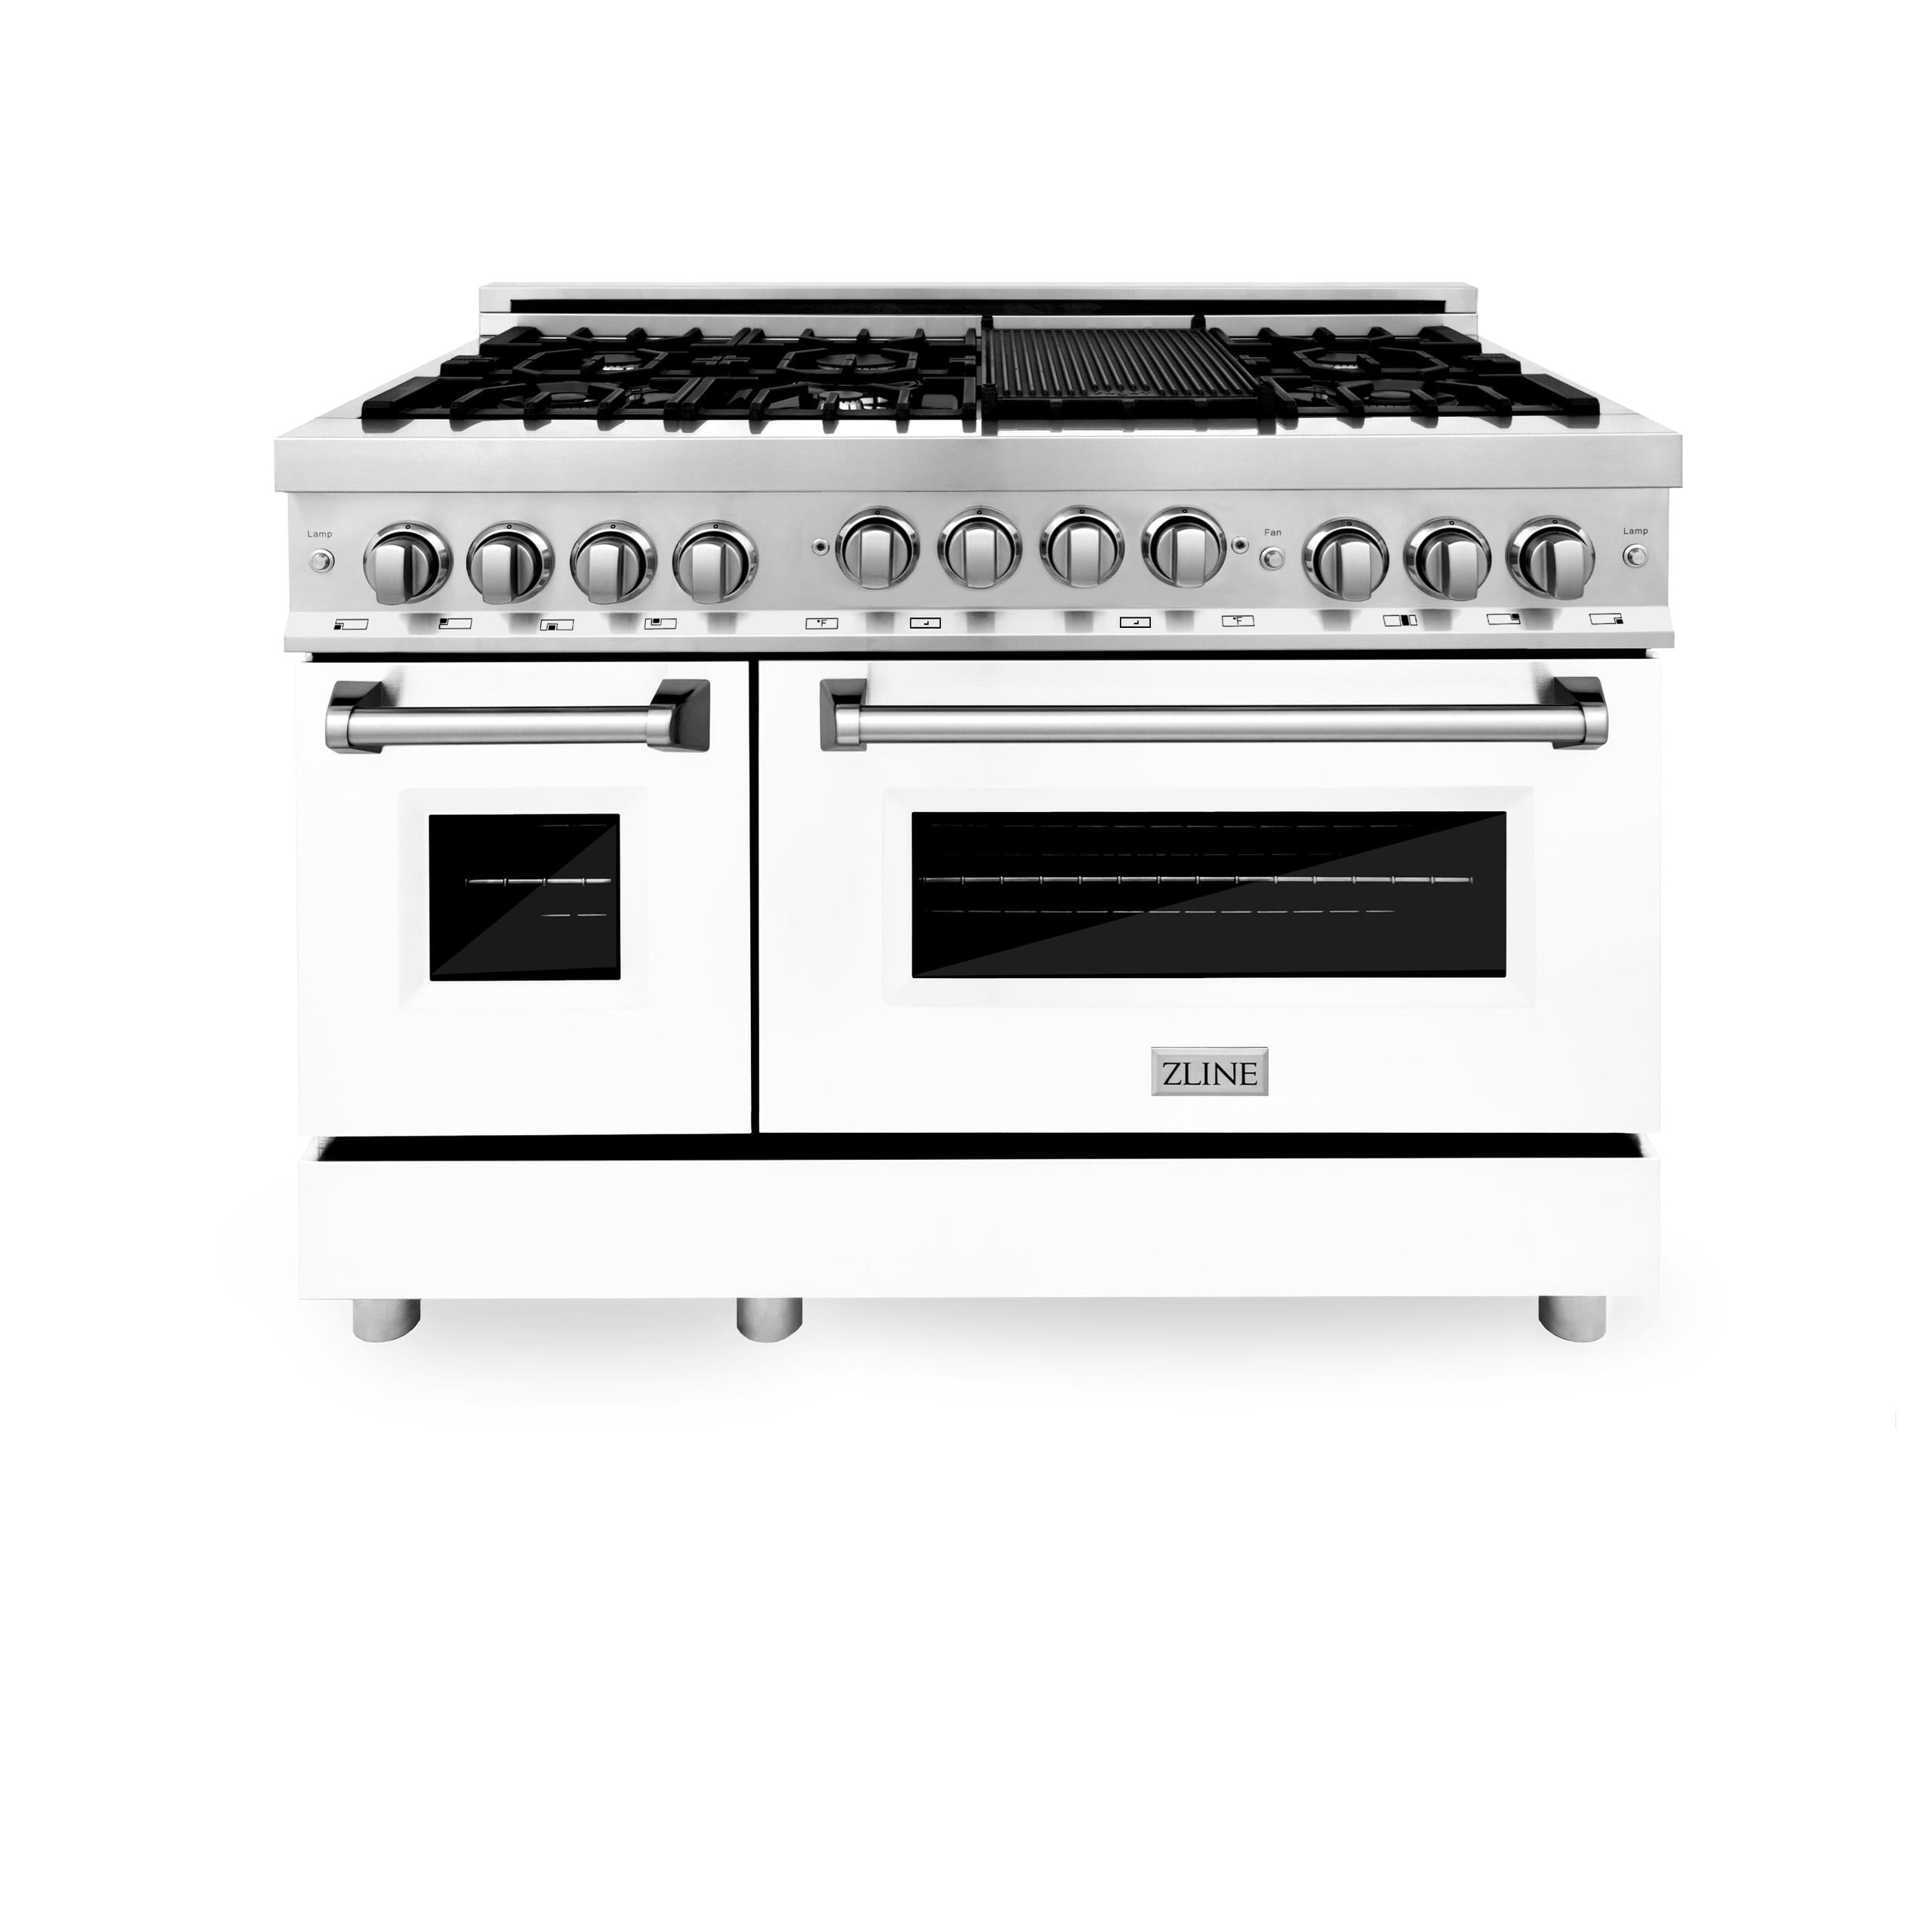 ZLINE KITCHEN AND BATH RGBM48 ZLINE 48" 6.0 cu. ft. Range with Gas Stove and Gas Oven in Stainless Steel Color: Blue Matte